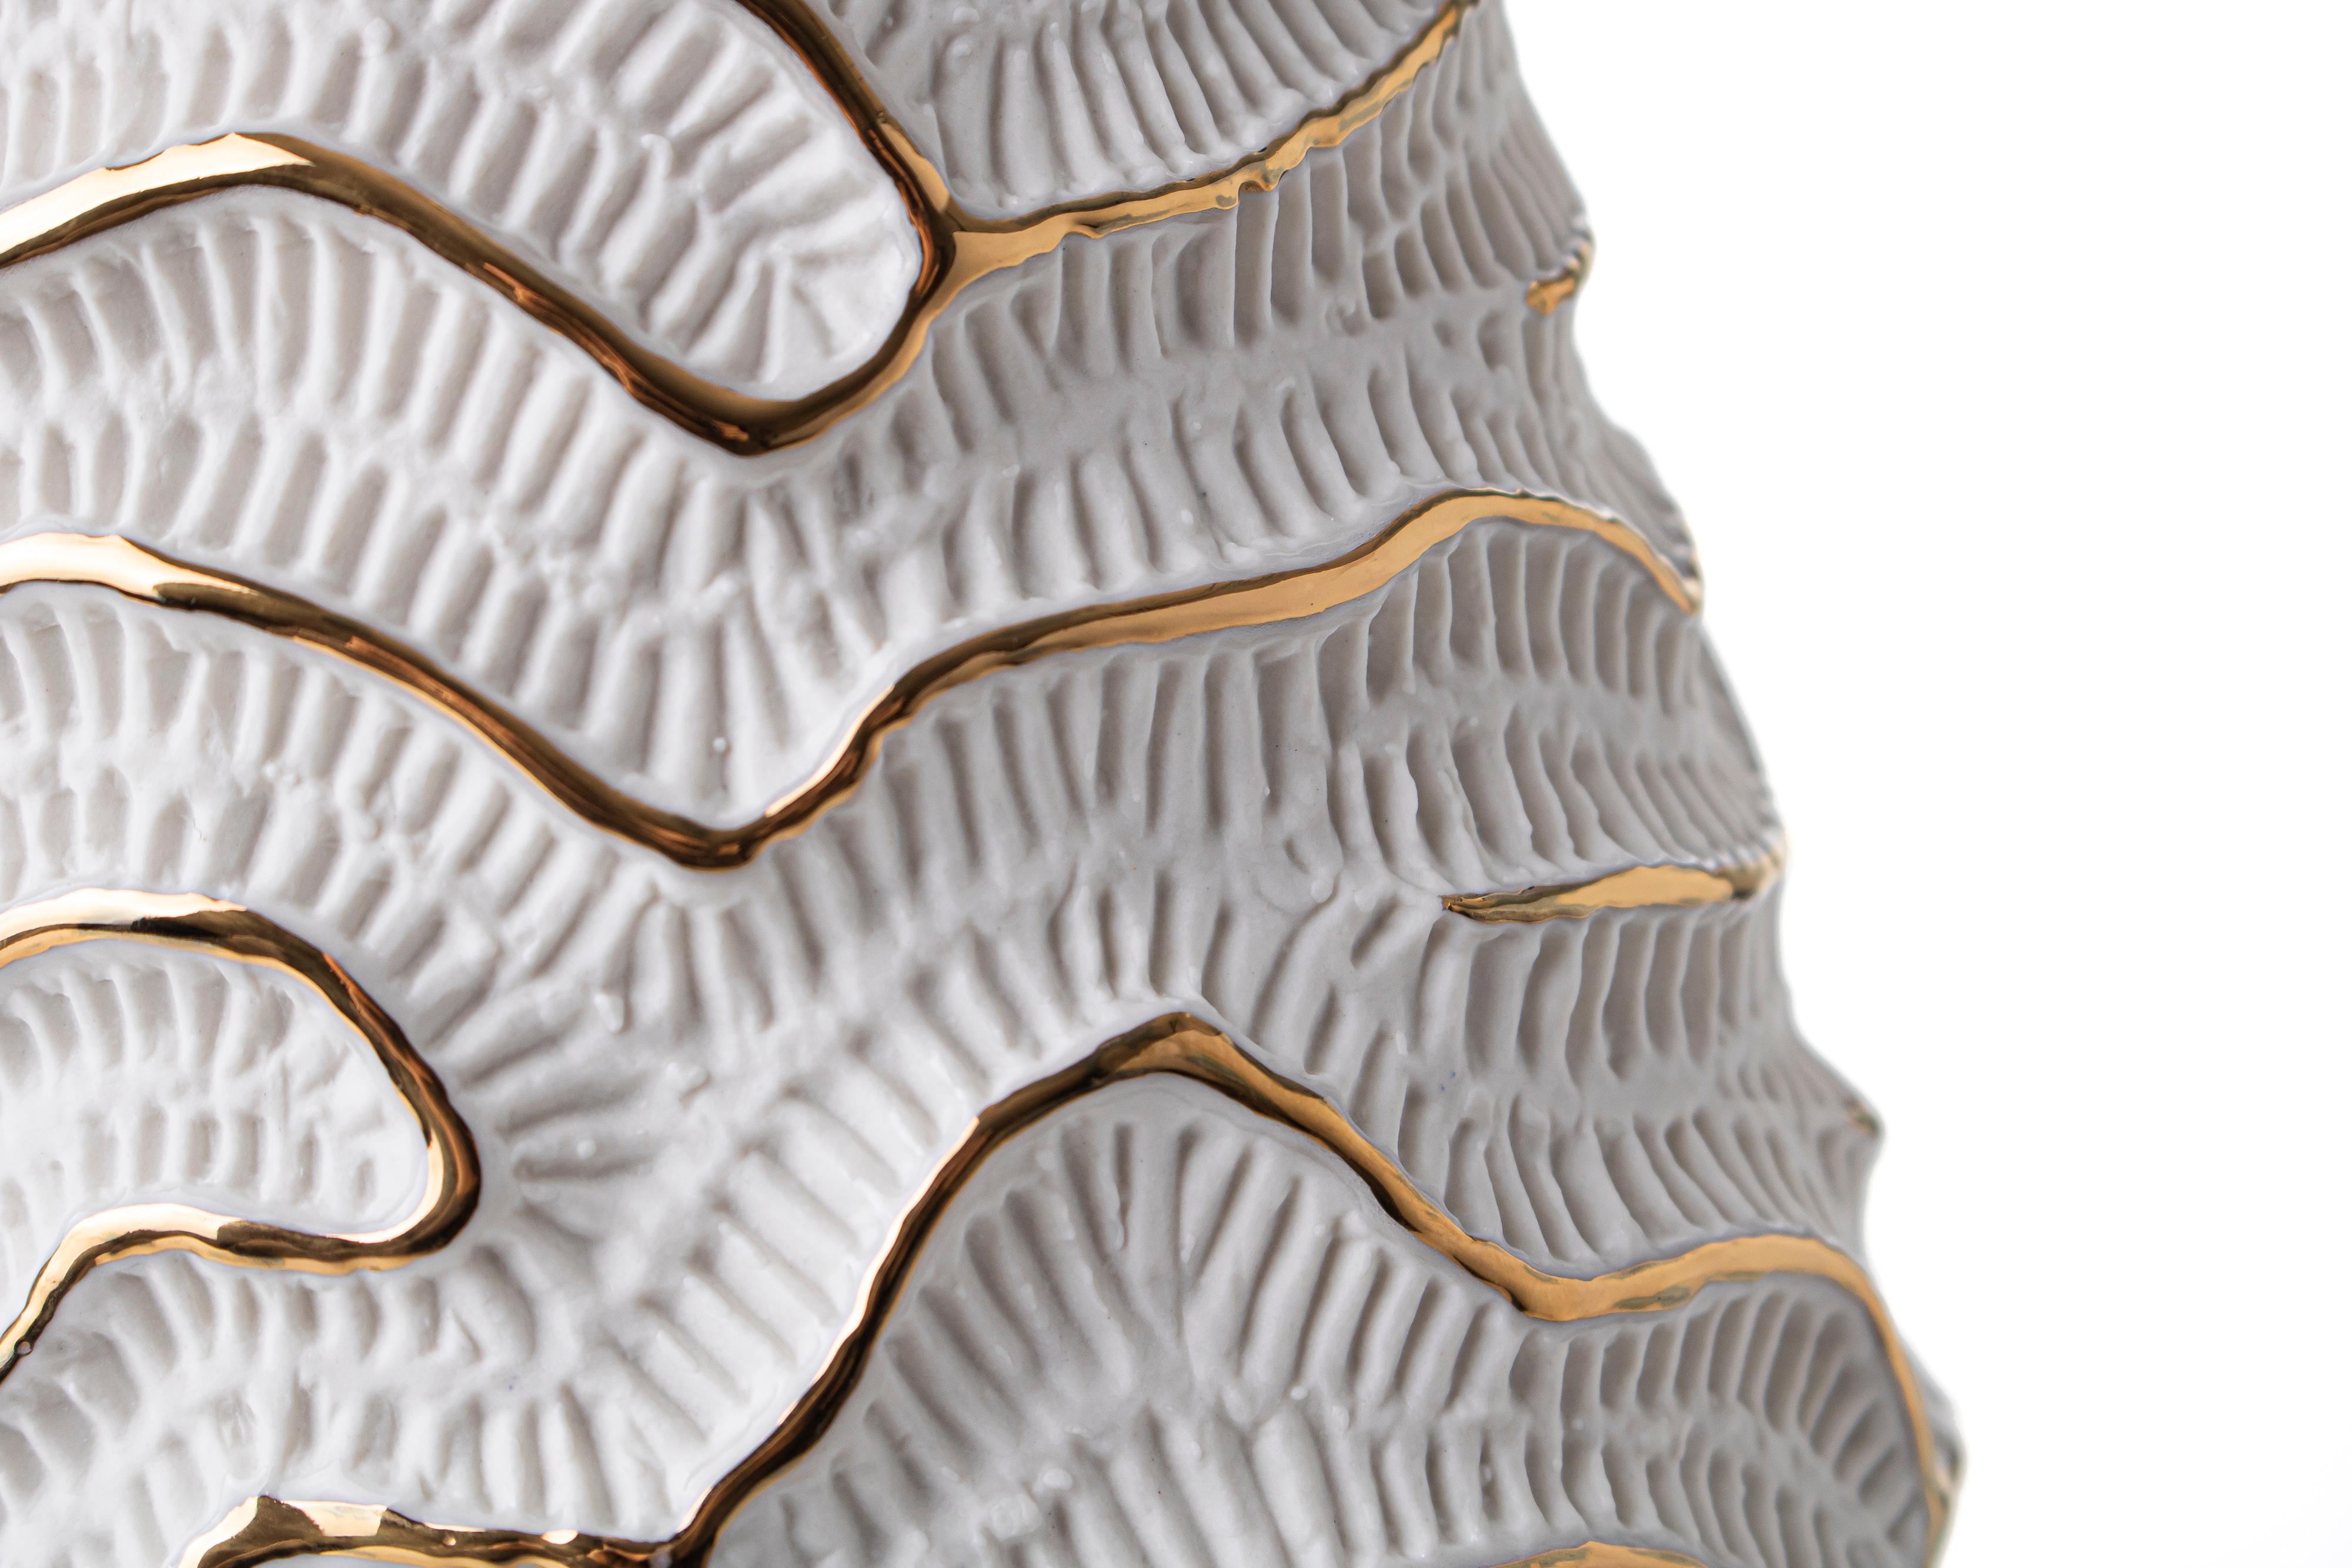 This porcelain vase, inspired by Coral Reef, combines the mysterious beauty of Nature with the timeless elegance of gold 23k, for unique and contemporary interiors. A dense minute texture, referring to fossils of madrepores, acts as a skeleton for